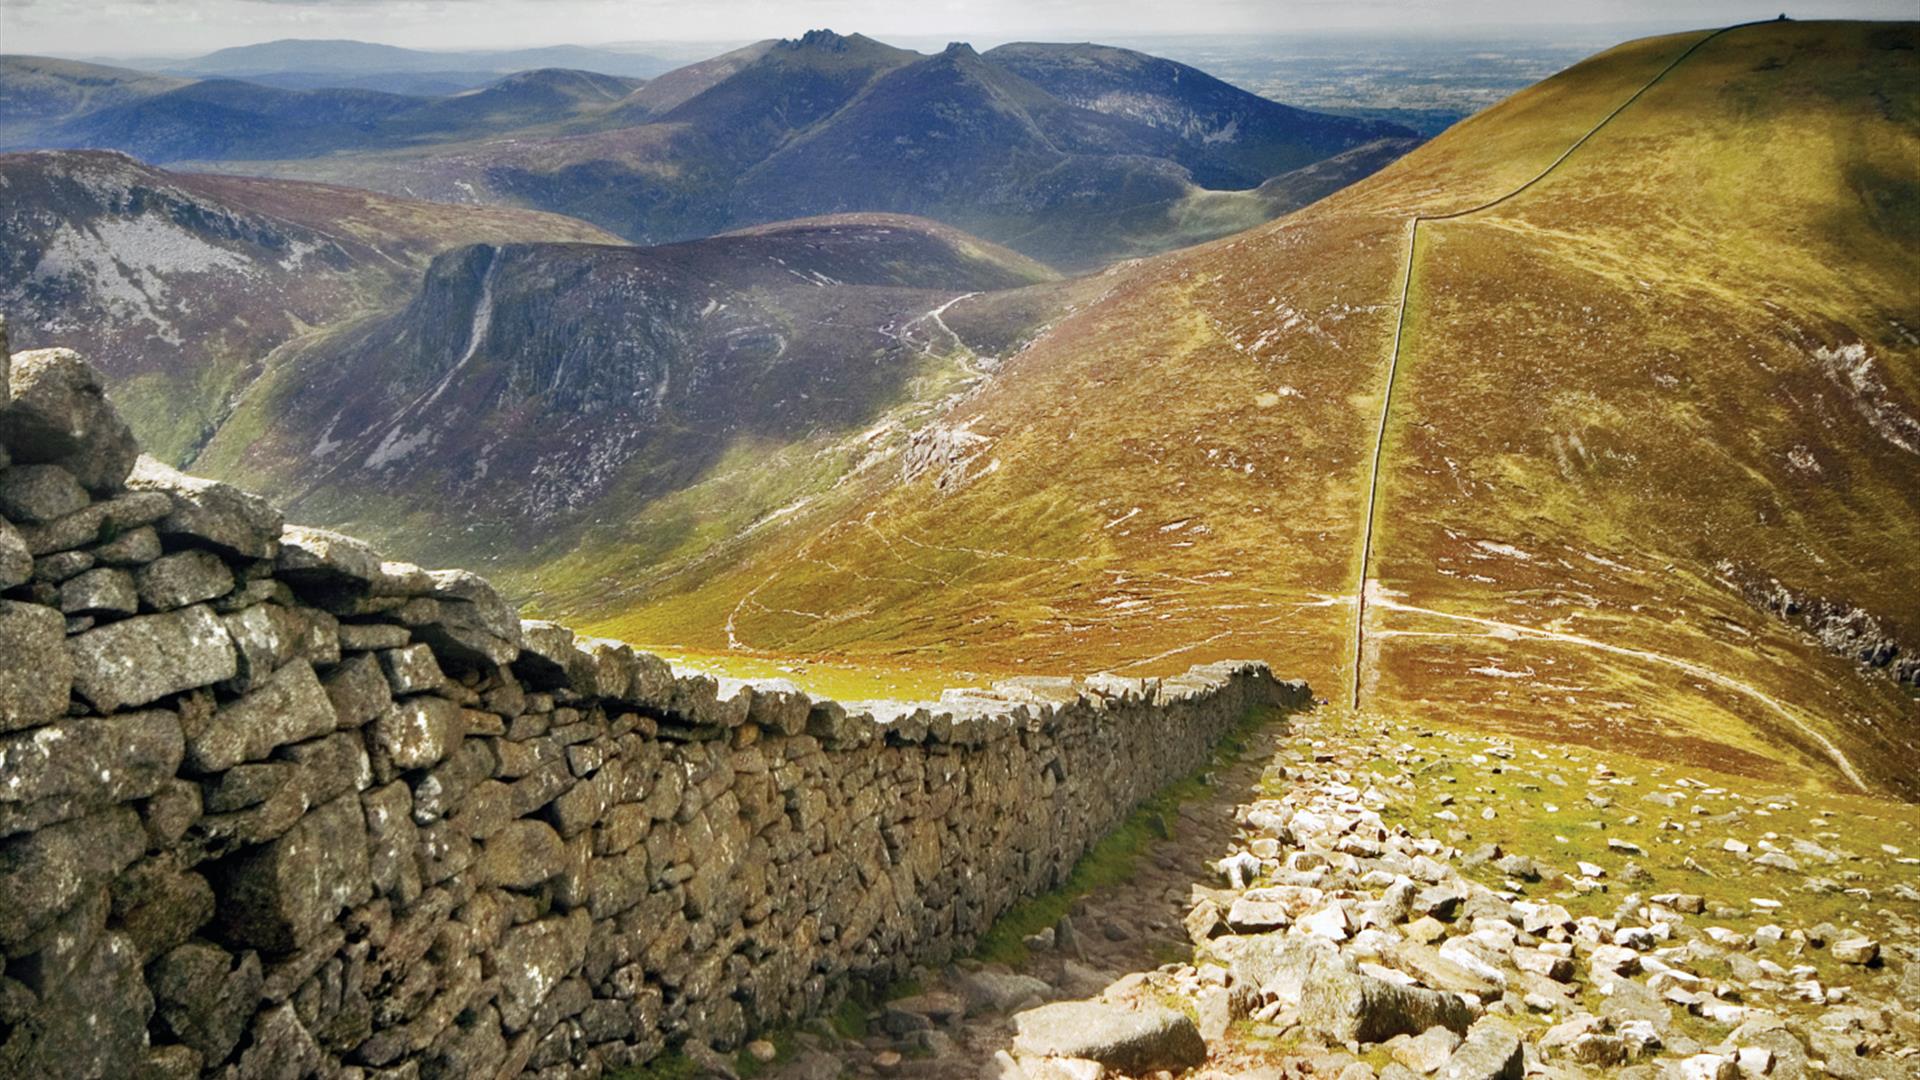 Mourne Wall in the Mourne Mountains